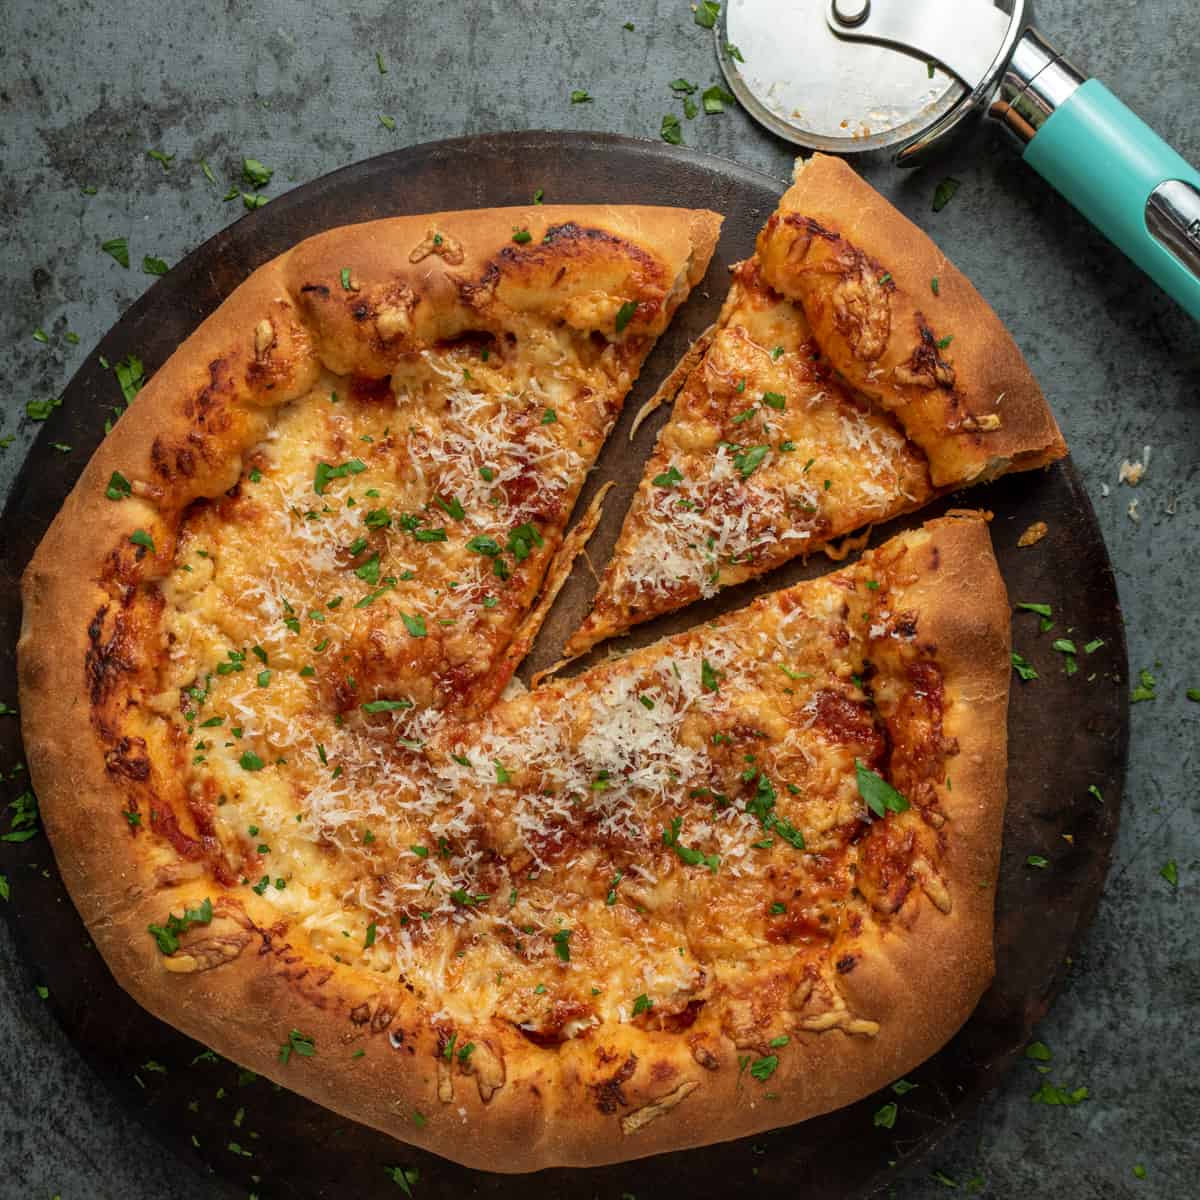 A fully cooked pizza on a pizza stone with one slice cut out. The one slice is slightly pulled out. In the corner of the photo is the pizza cutter. 